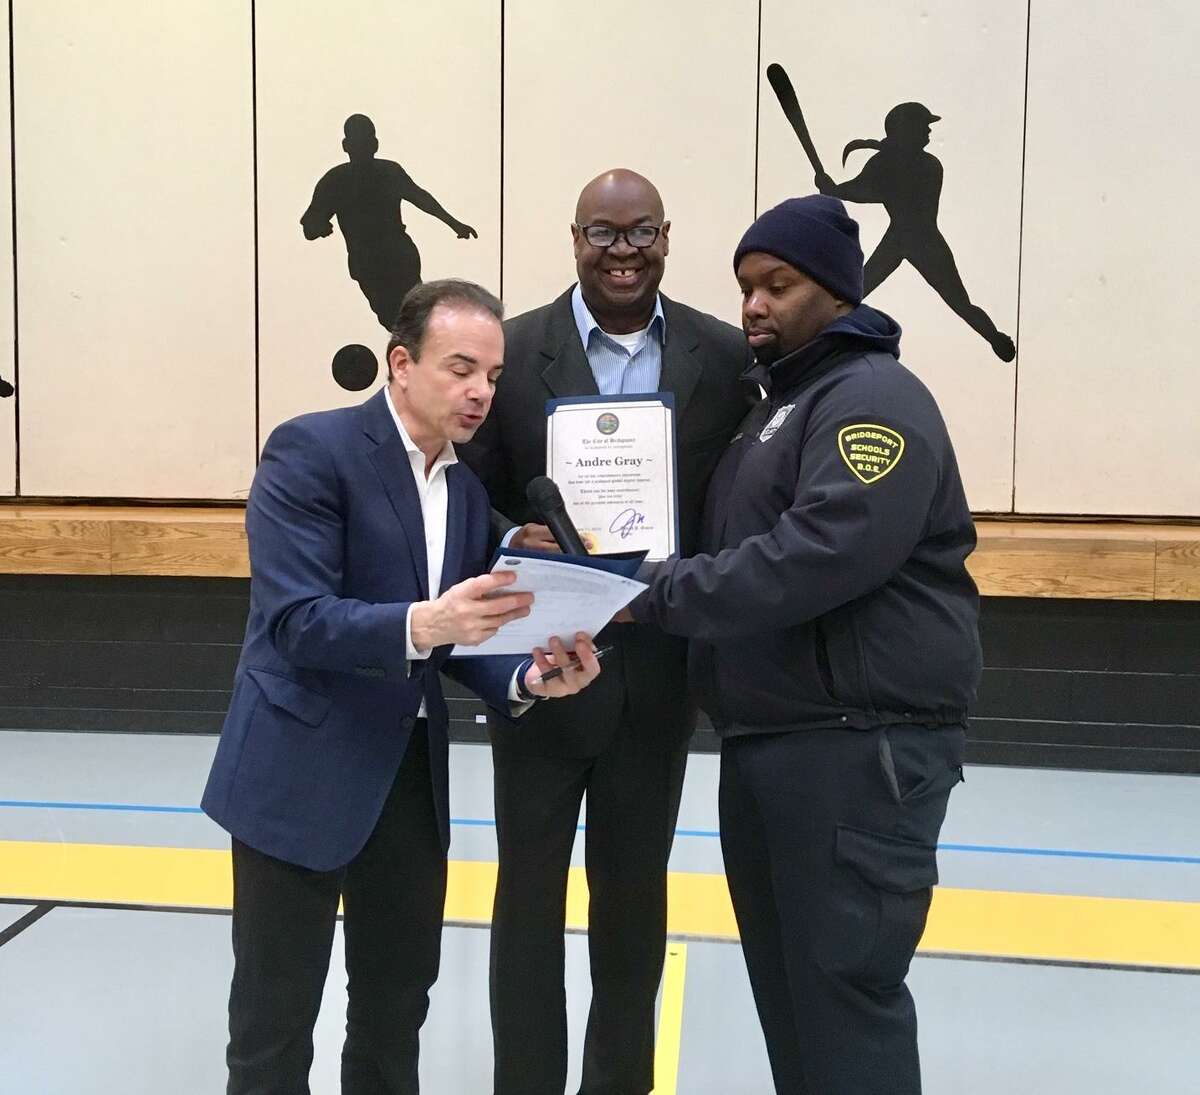 Inventor Andre Gray gets a certificate from Mayor Joe Ganim and Security Guard Harry Bell at Curiale School in Bridgeport. Feb. 11, 2019